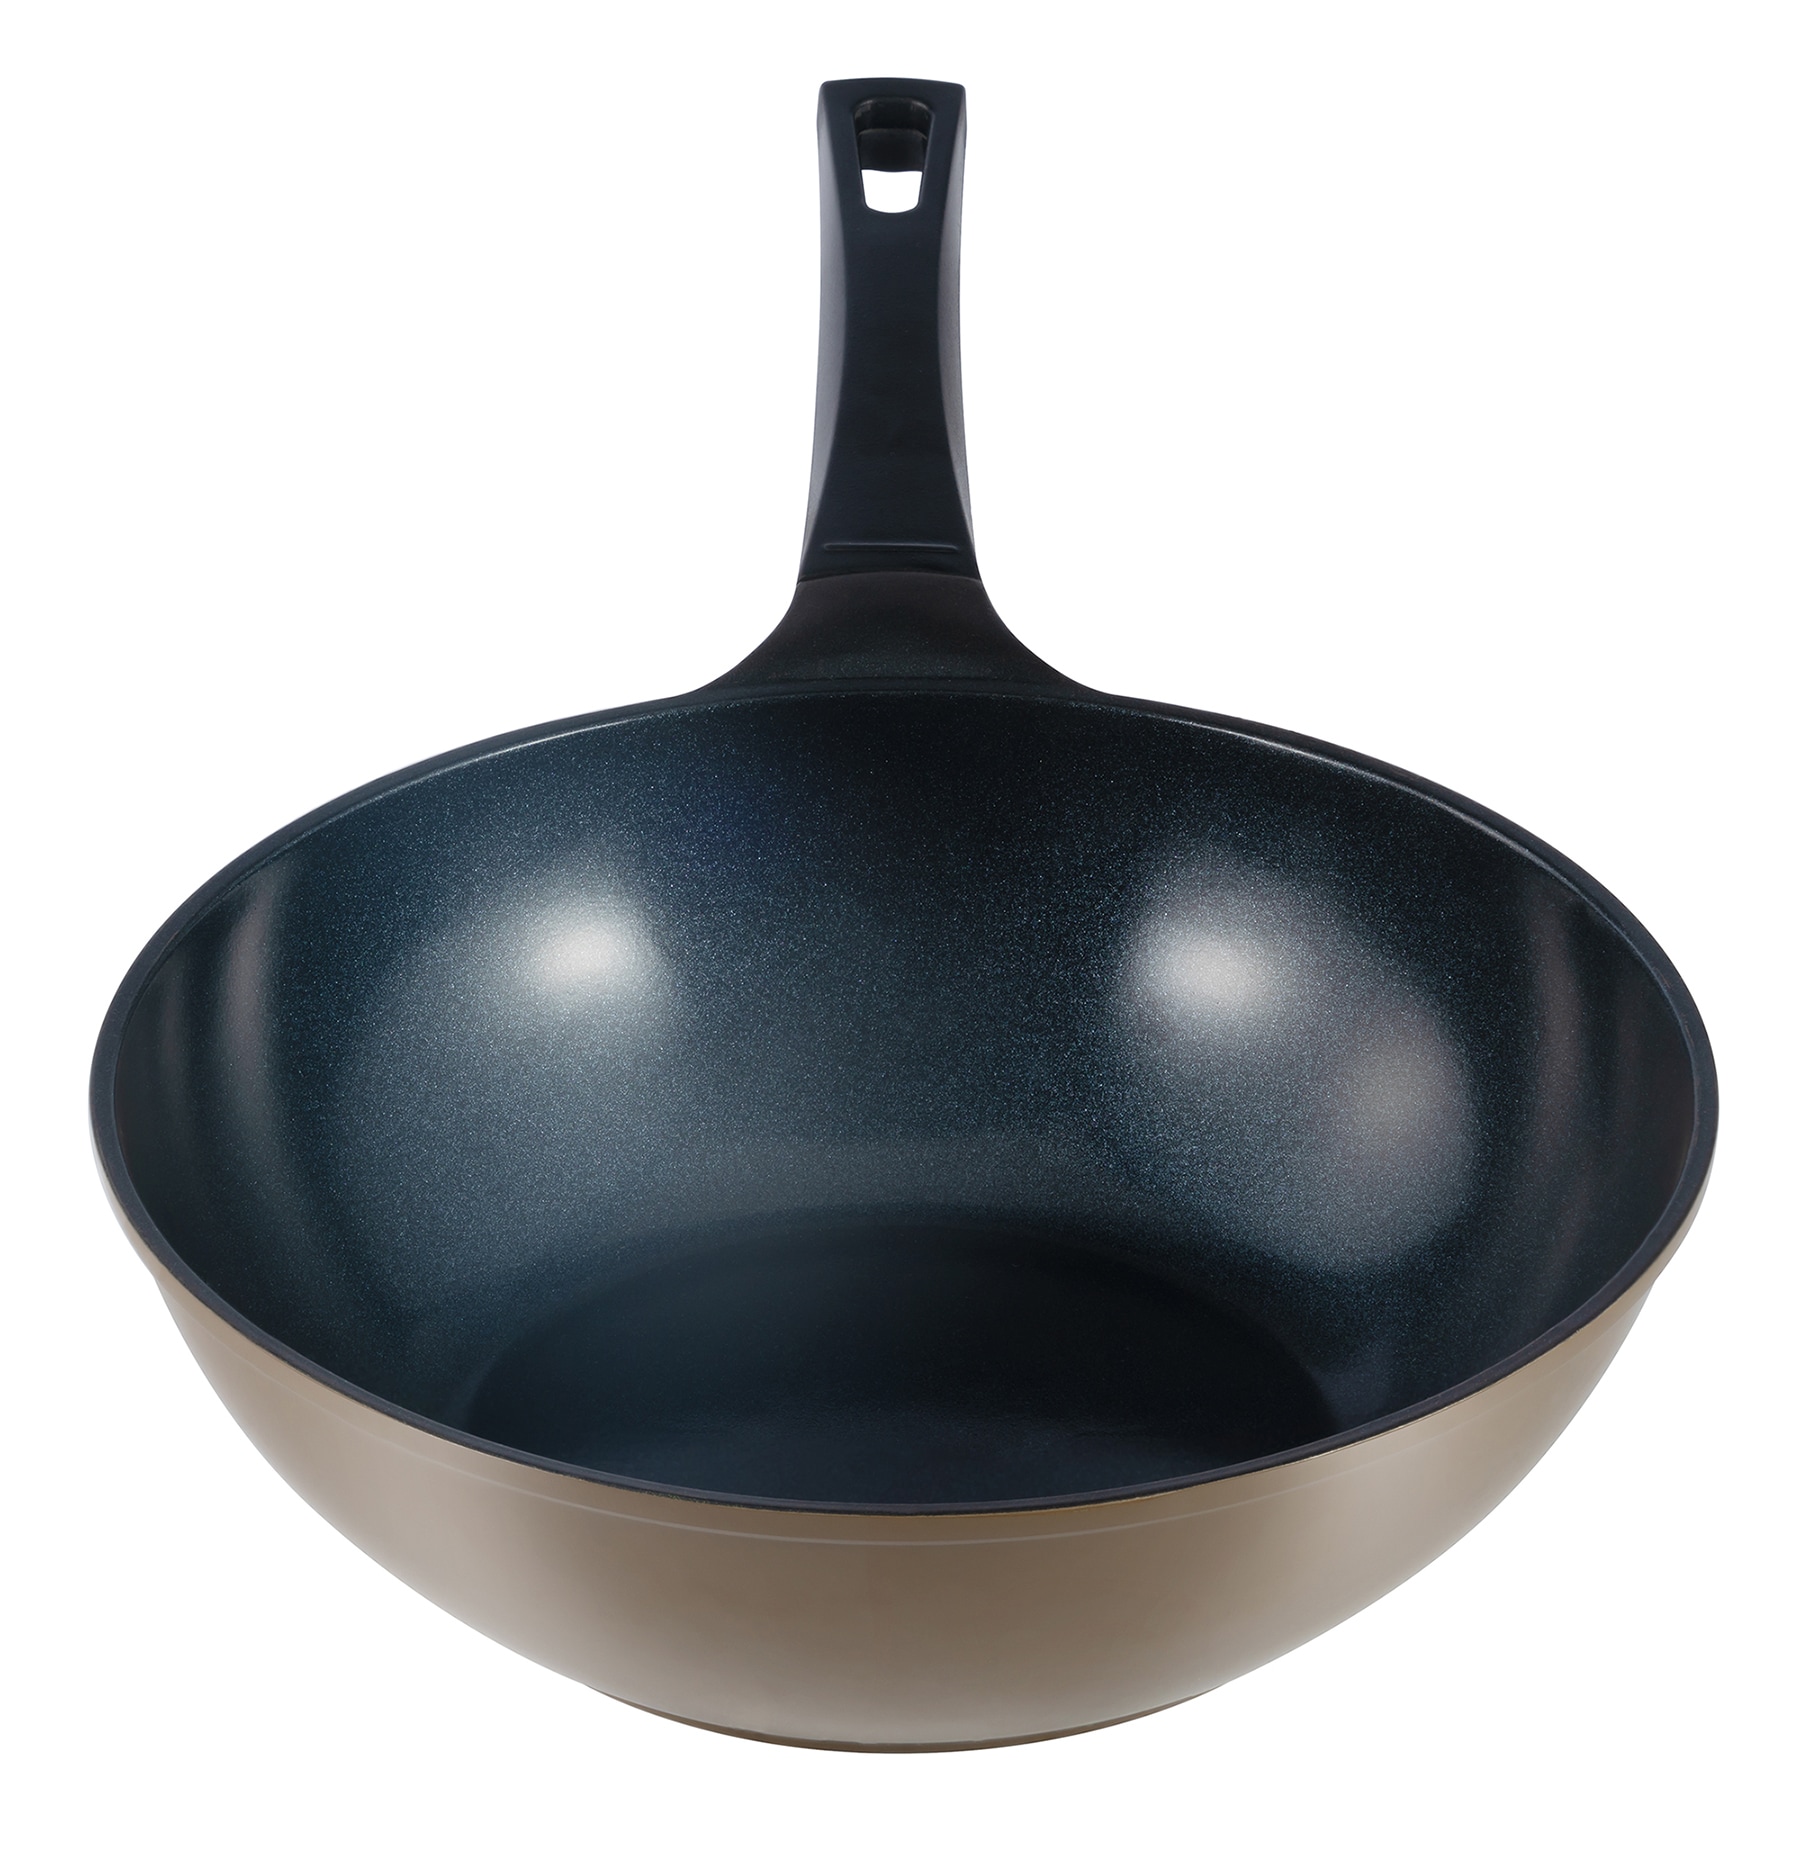 14 Green Earth Wok by Ozeri, with Smooth Ceramic Non-Stick Coating (100% PTFE and PFOA Free)